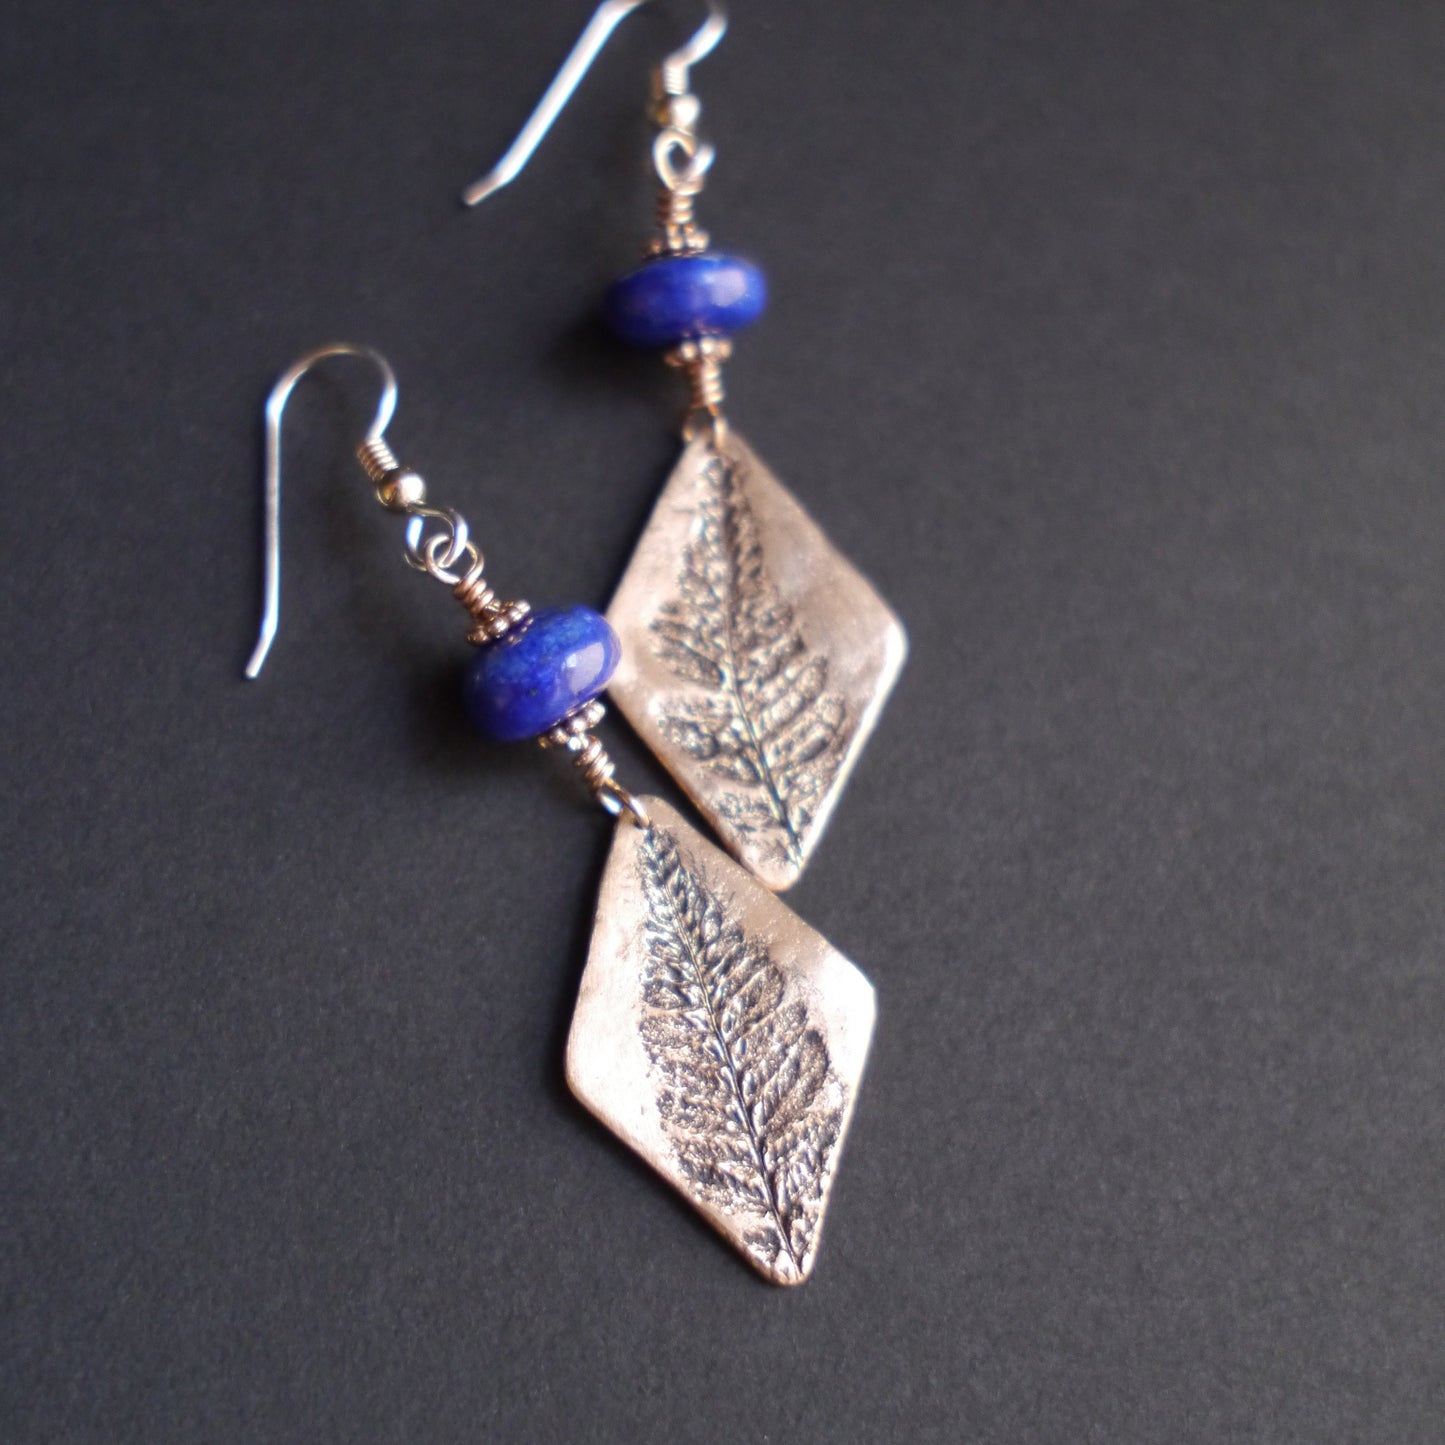 Natural Fern Earrings in Bronze with Lapis Lazuli